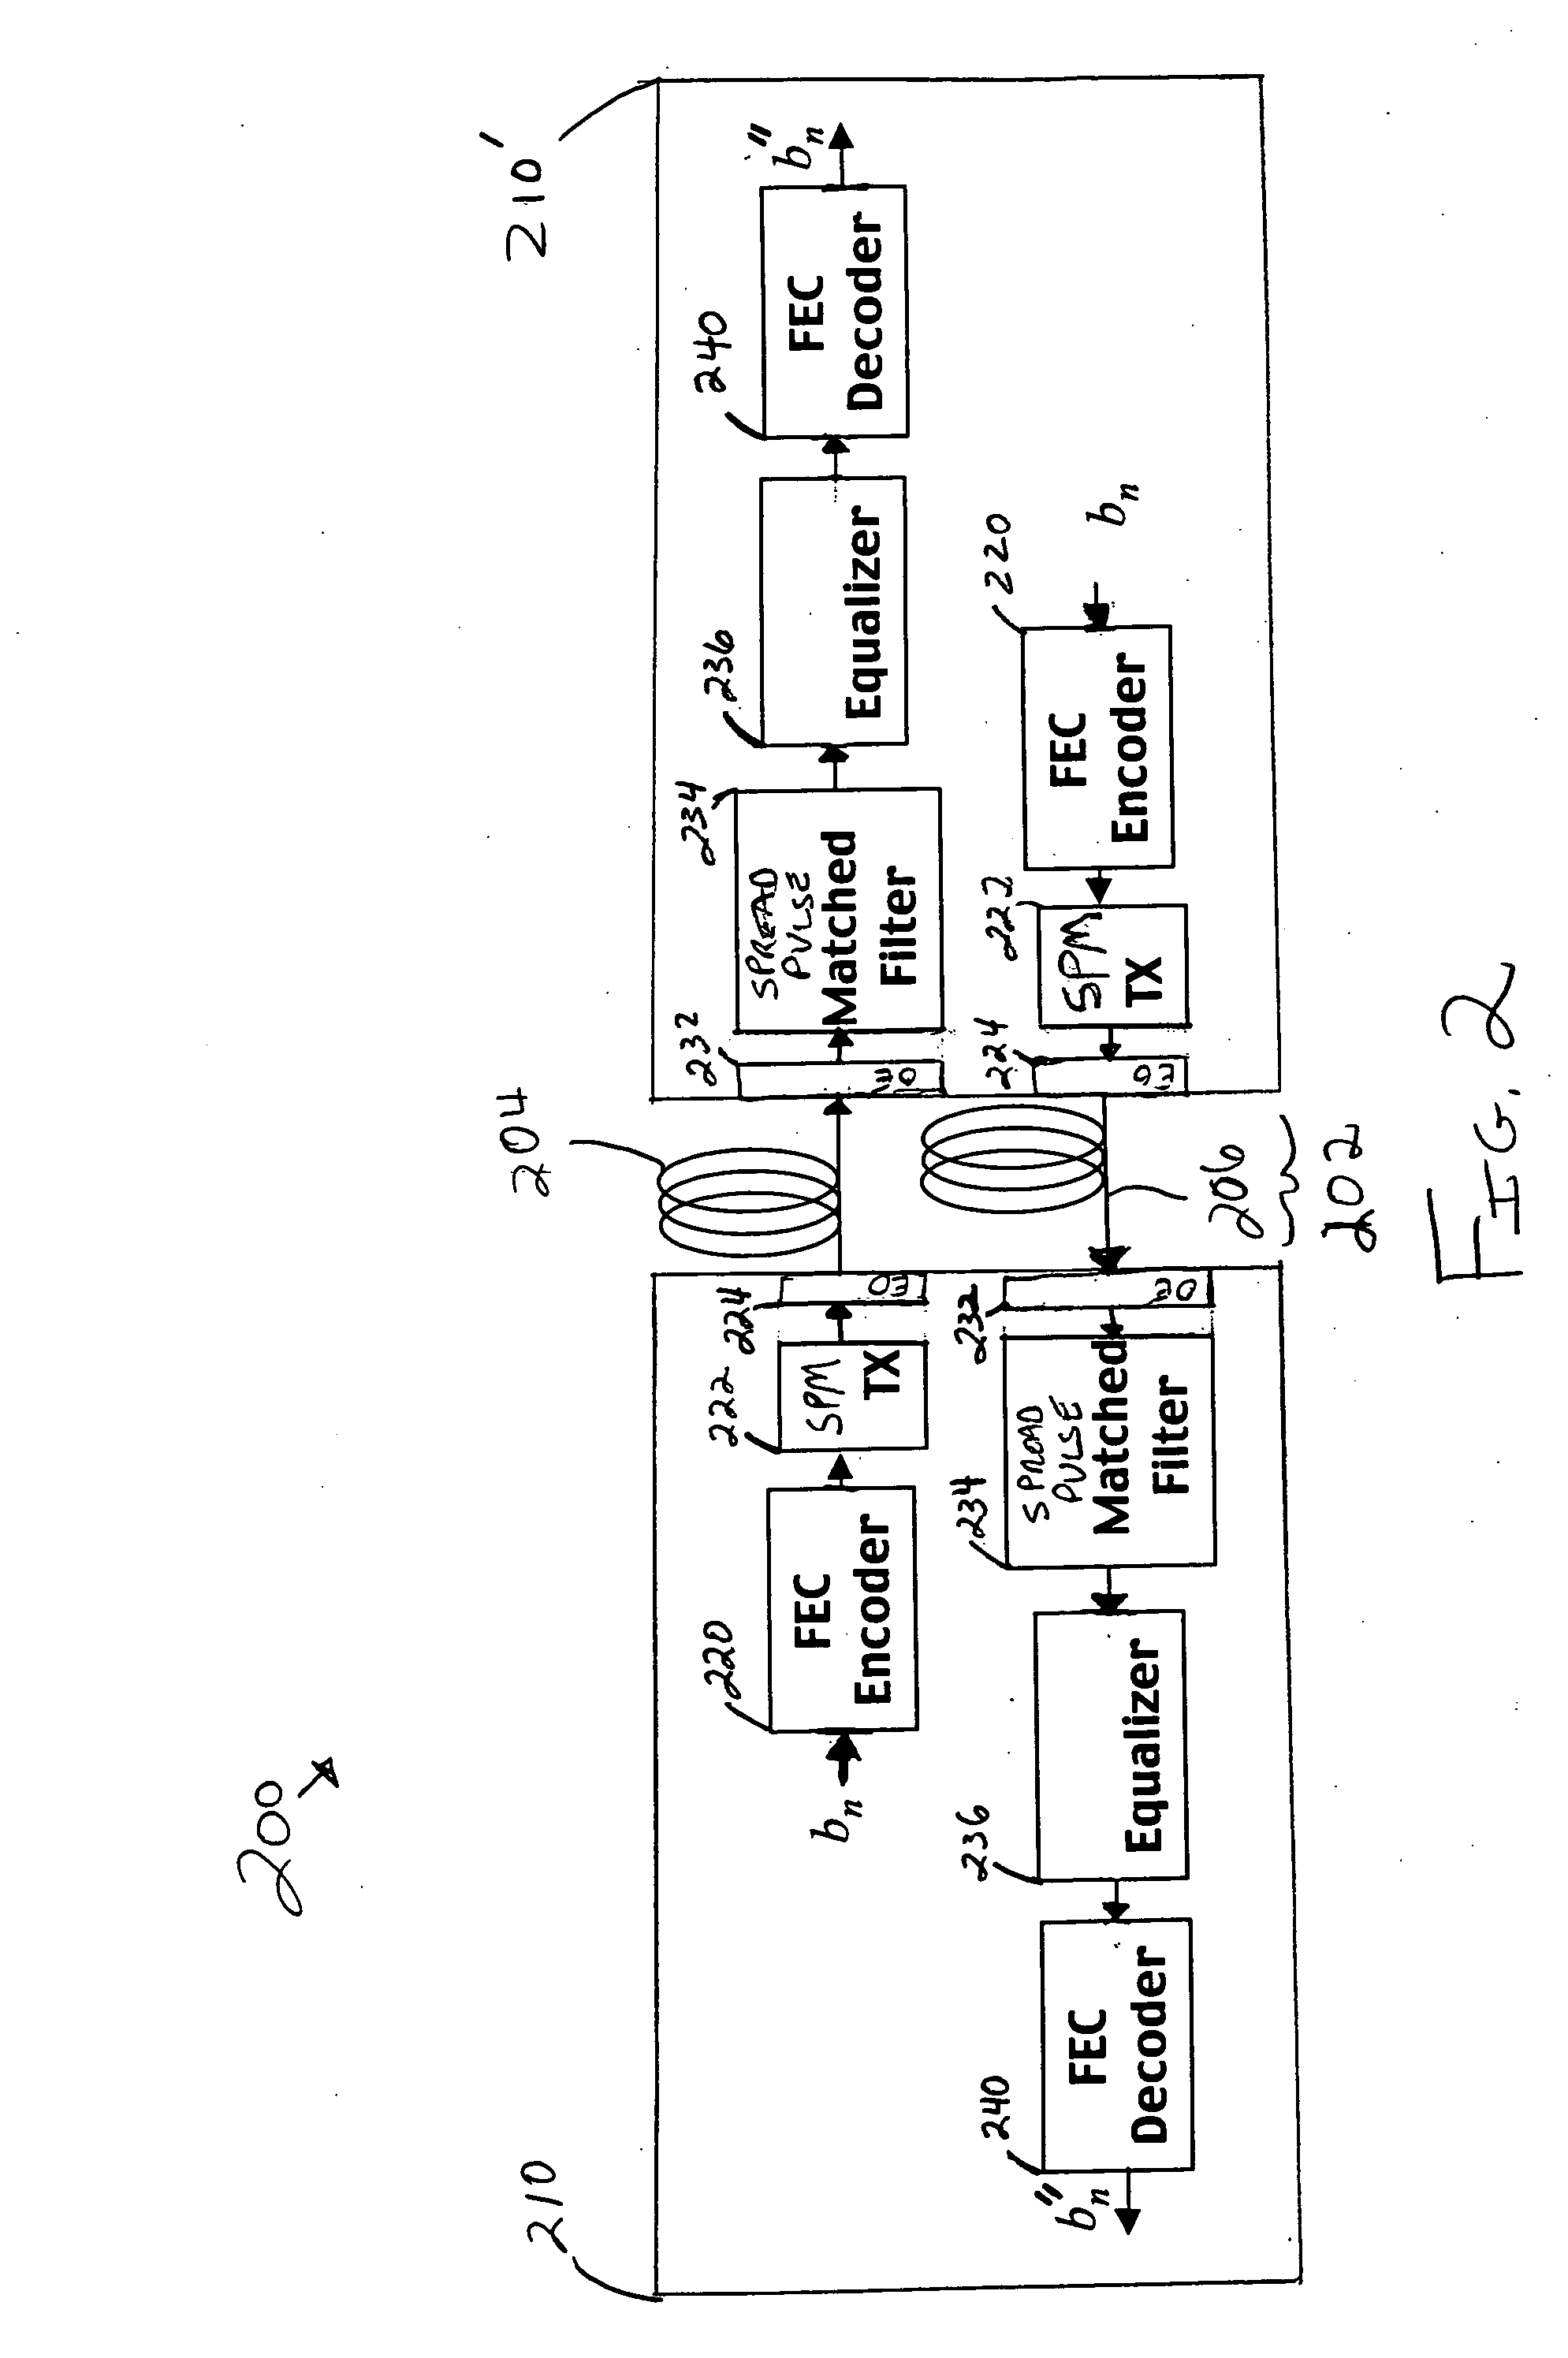 Systems with spread-pulse modulation and nonlinear time domain equalization for fiber optic communication channels